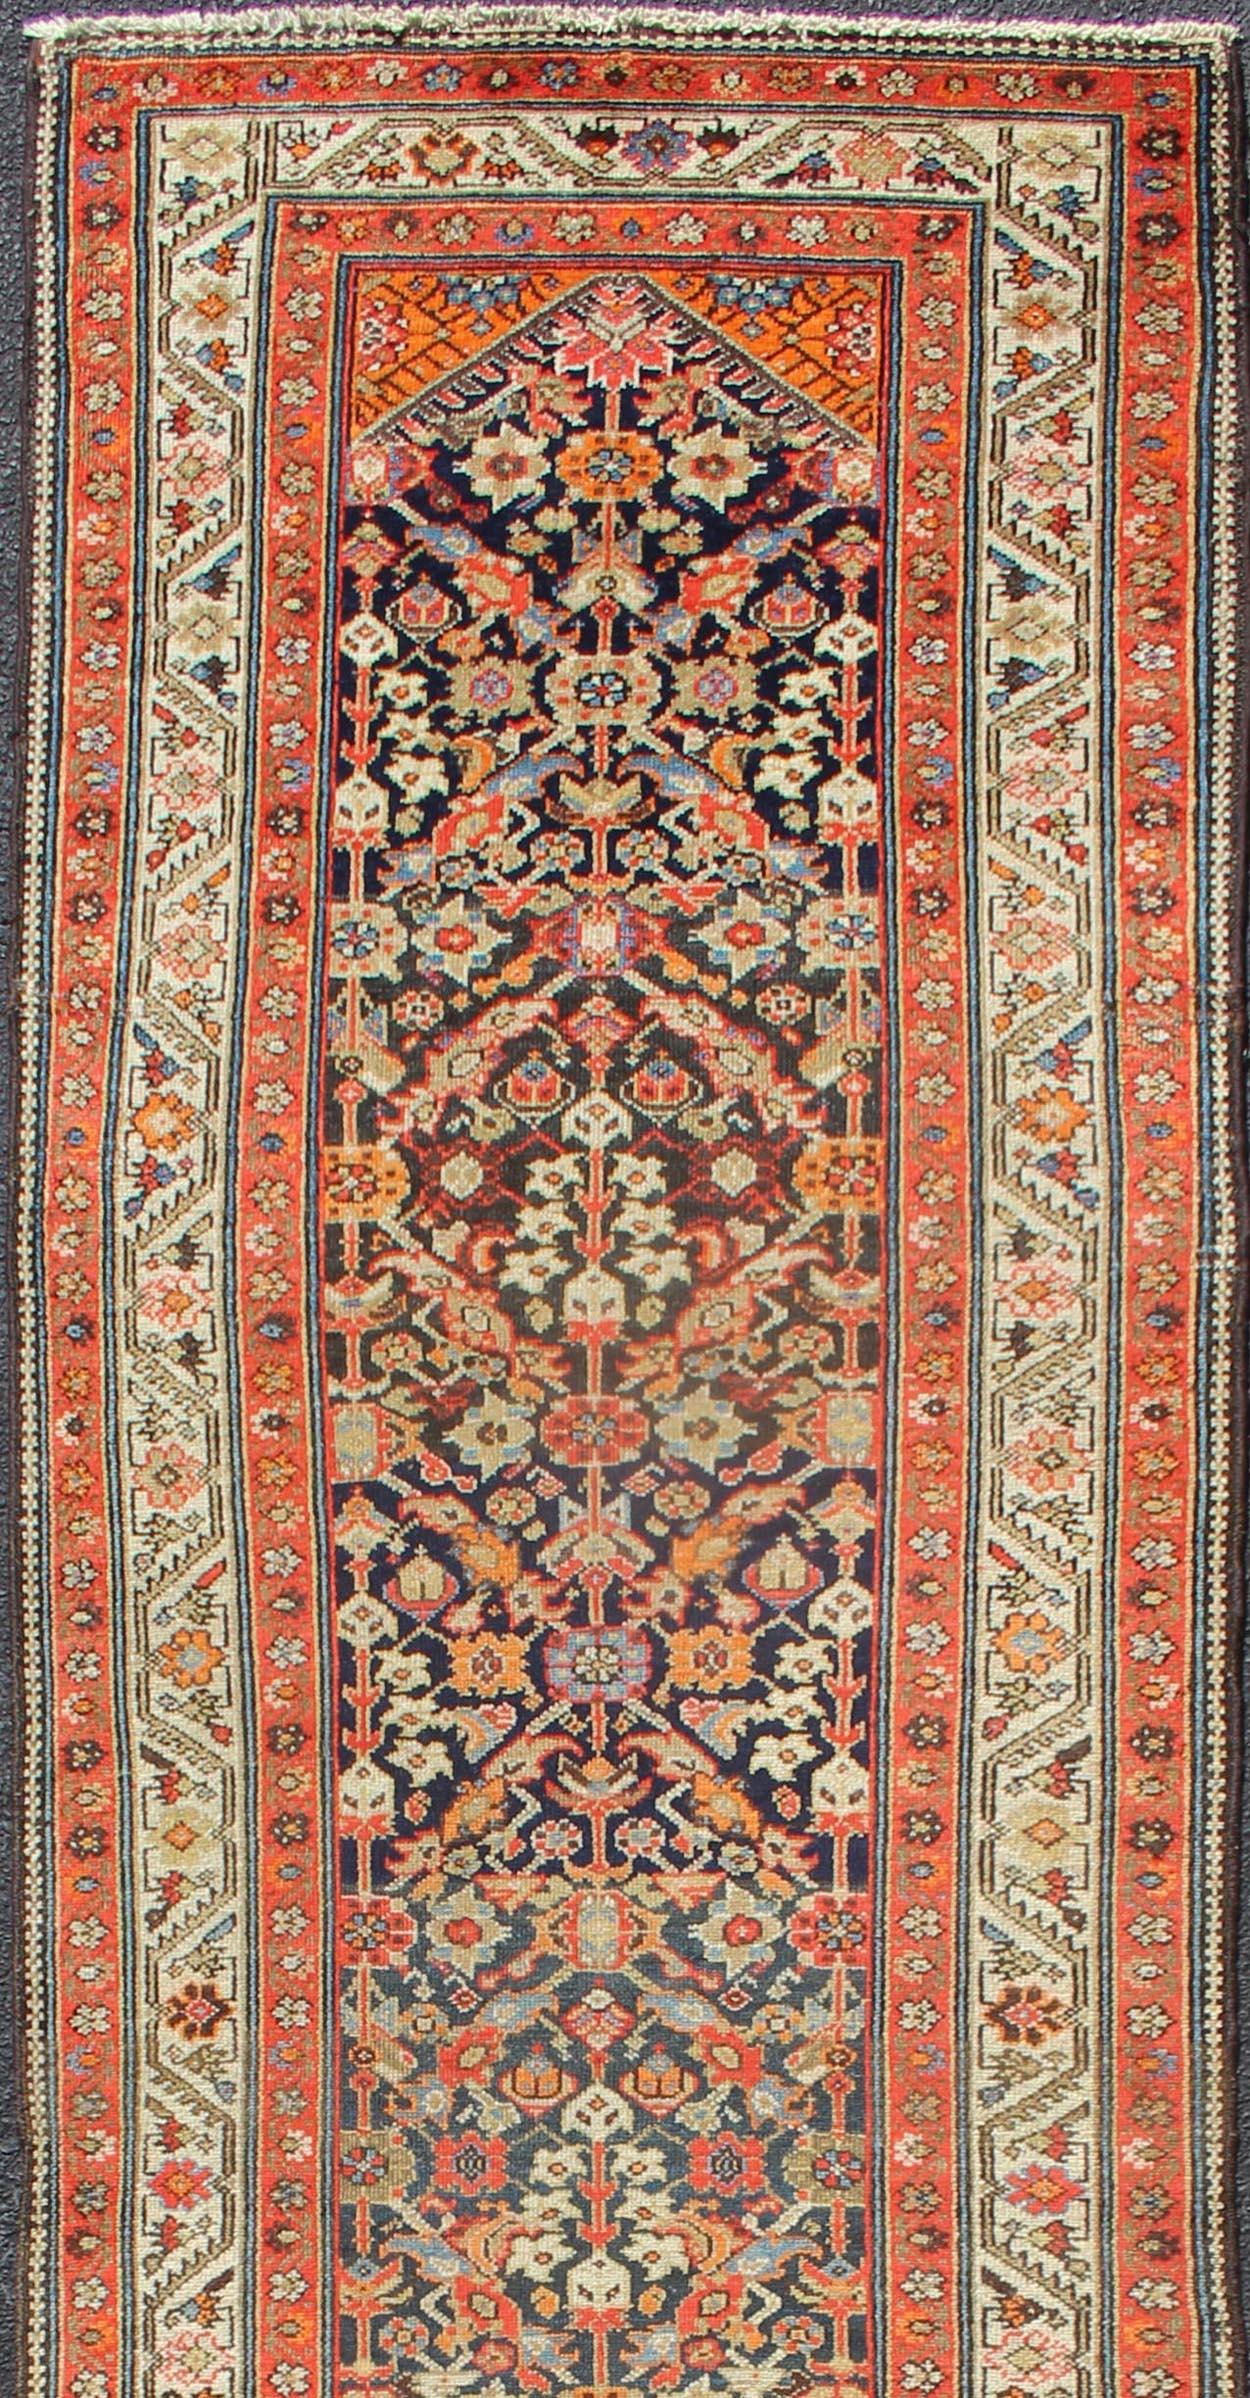 Variegated Border Malayer antique runner from Persia with geometric repeating pattern in the background which Hosts to variegated shades of blue the main border is ivory while the accent colors of orange red in the guard borders frame the main